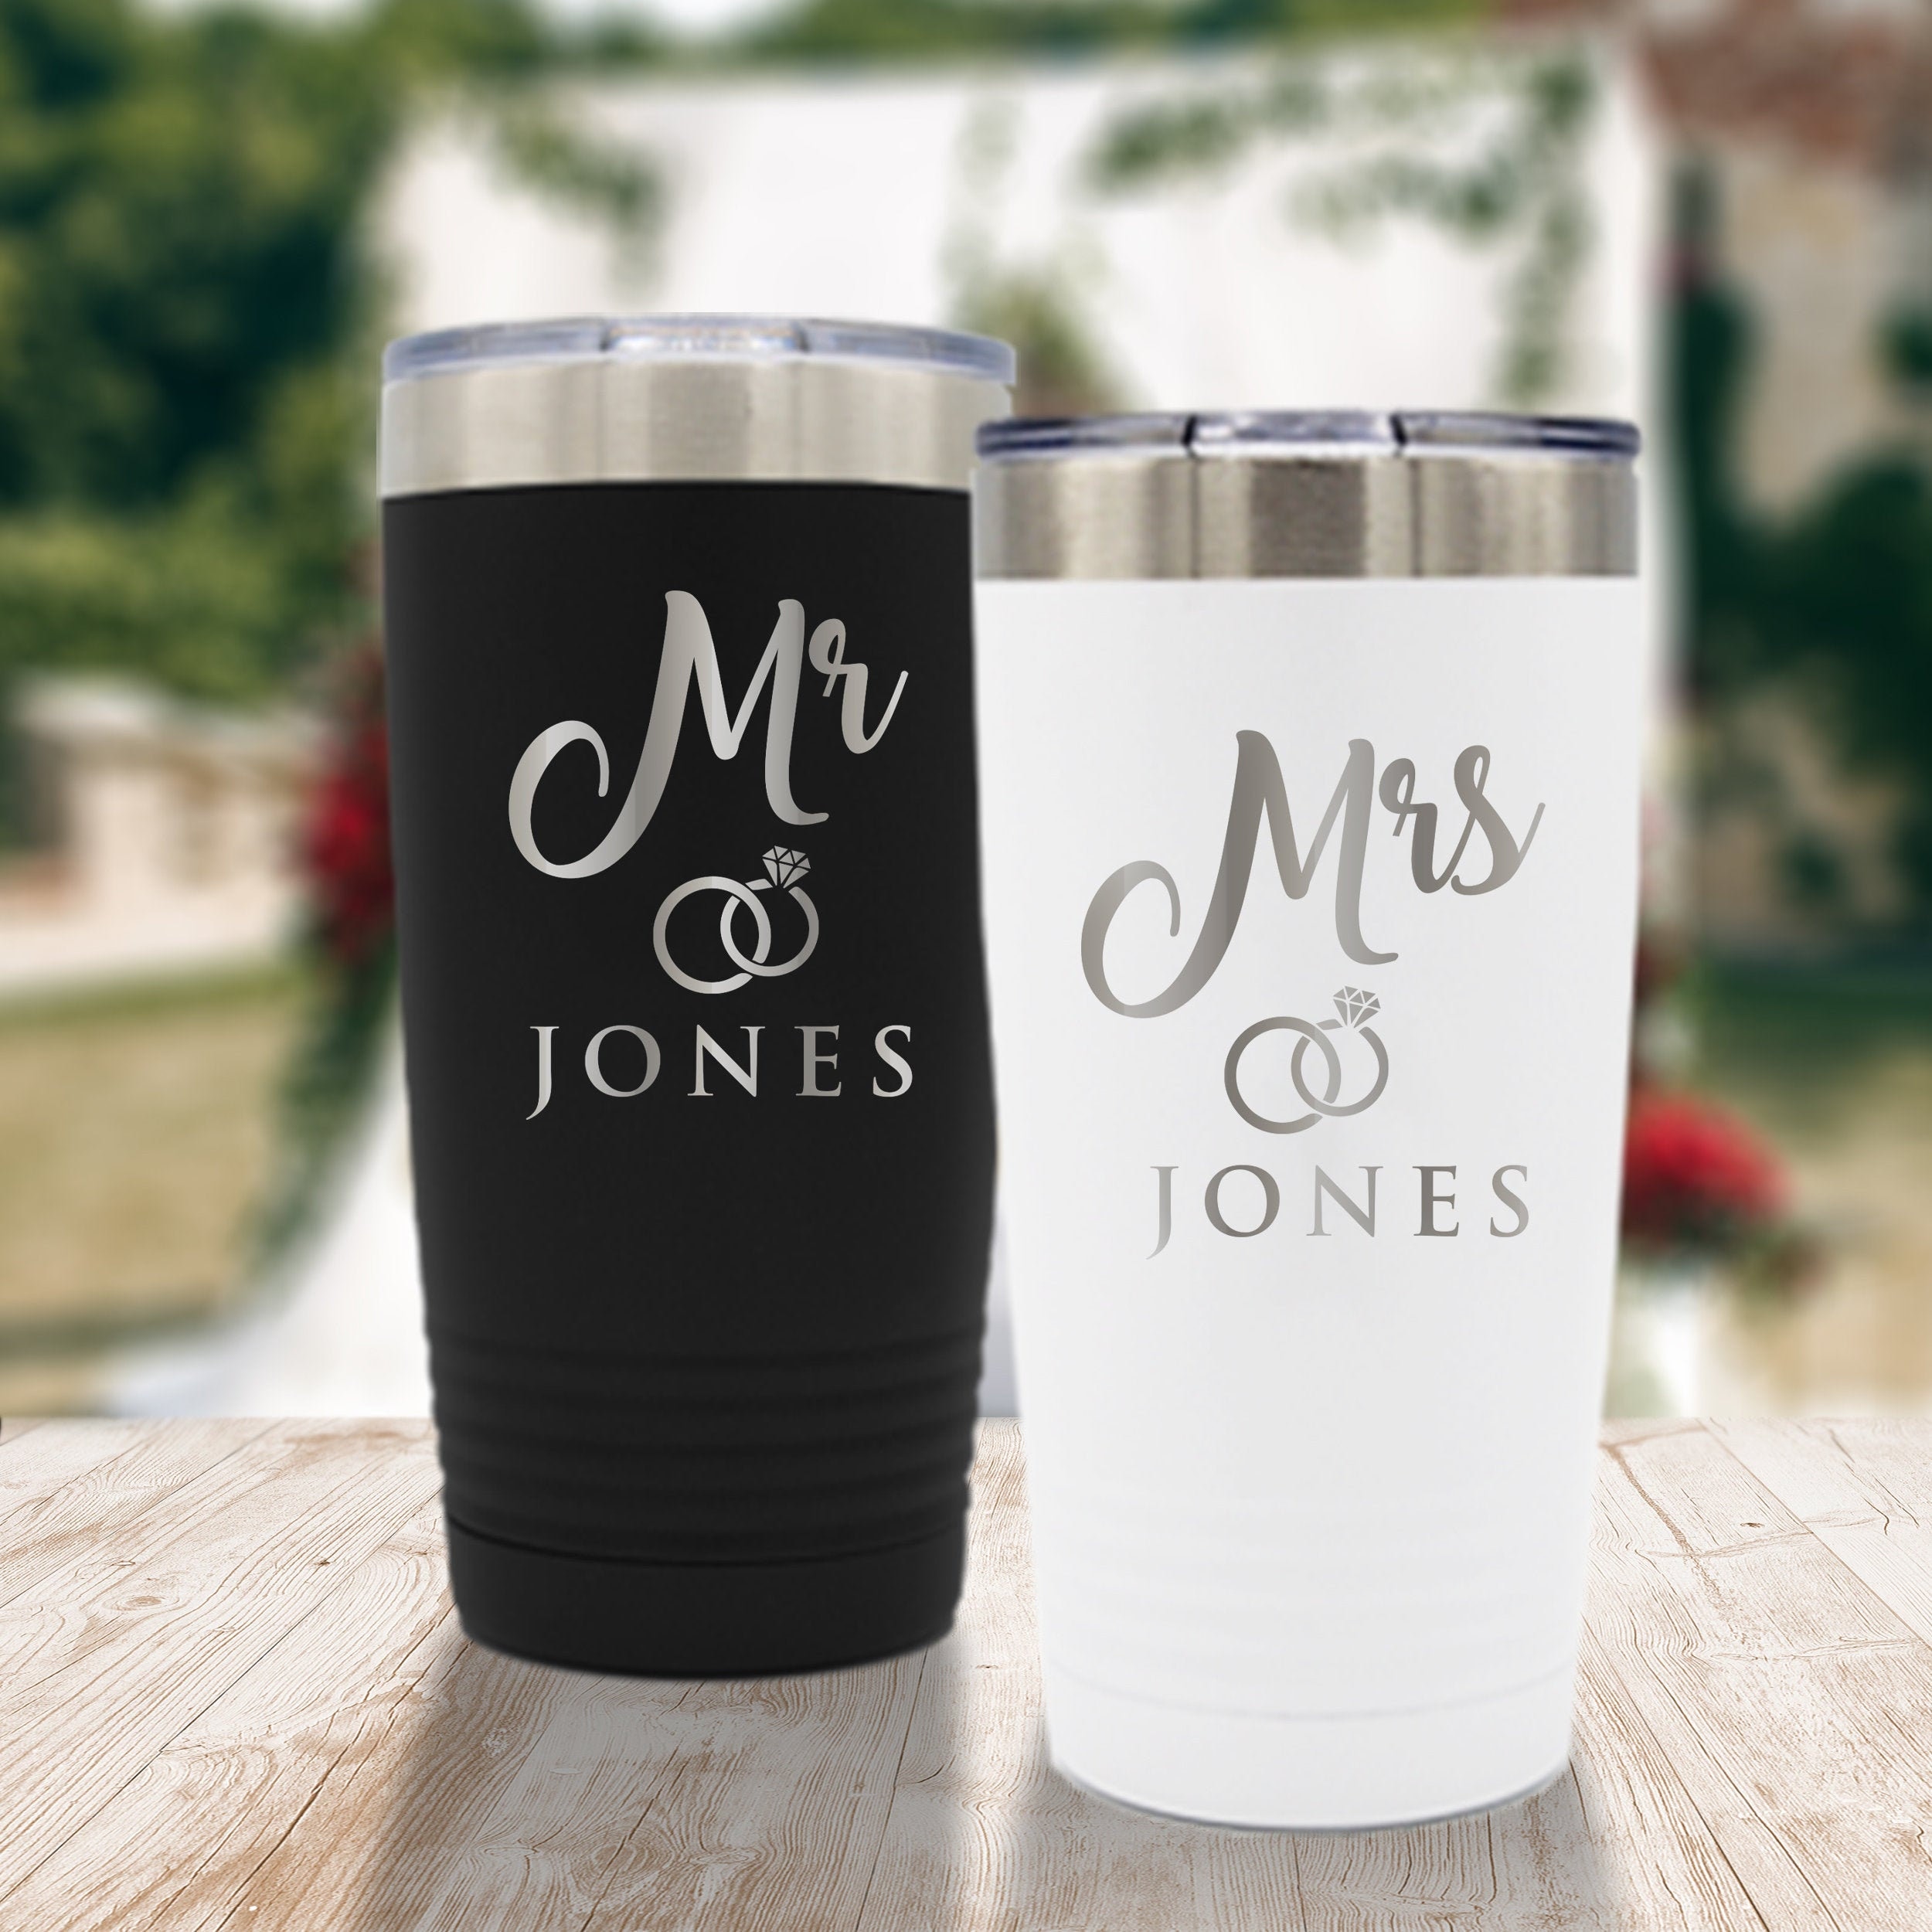 Mr and Mrs Tumblers Silver Set of 2 30oz Stainless Steel Wine Drink Cups Double Wall Insulated Bride and Groom Tumbler Honeymoon Couple Gifts Cups with Lid Gift Registry Anniversary Honeymoon Gift 